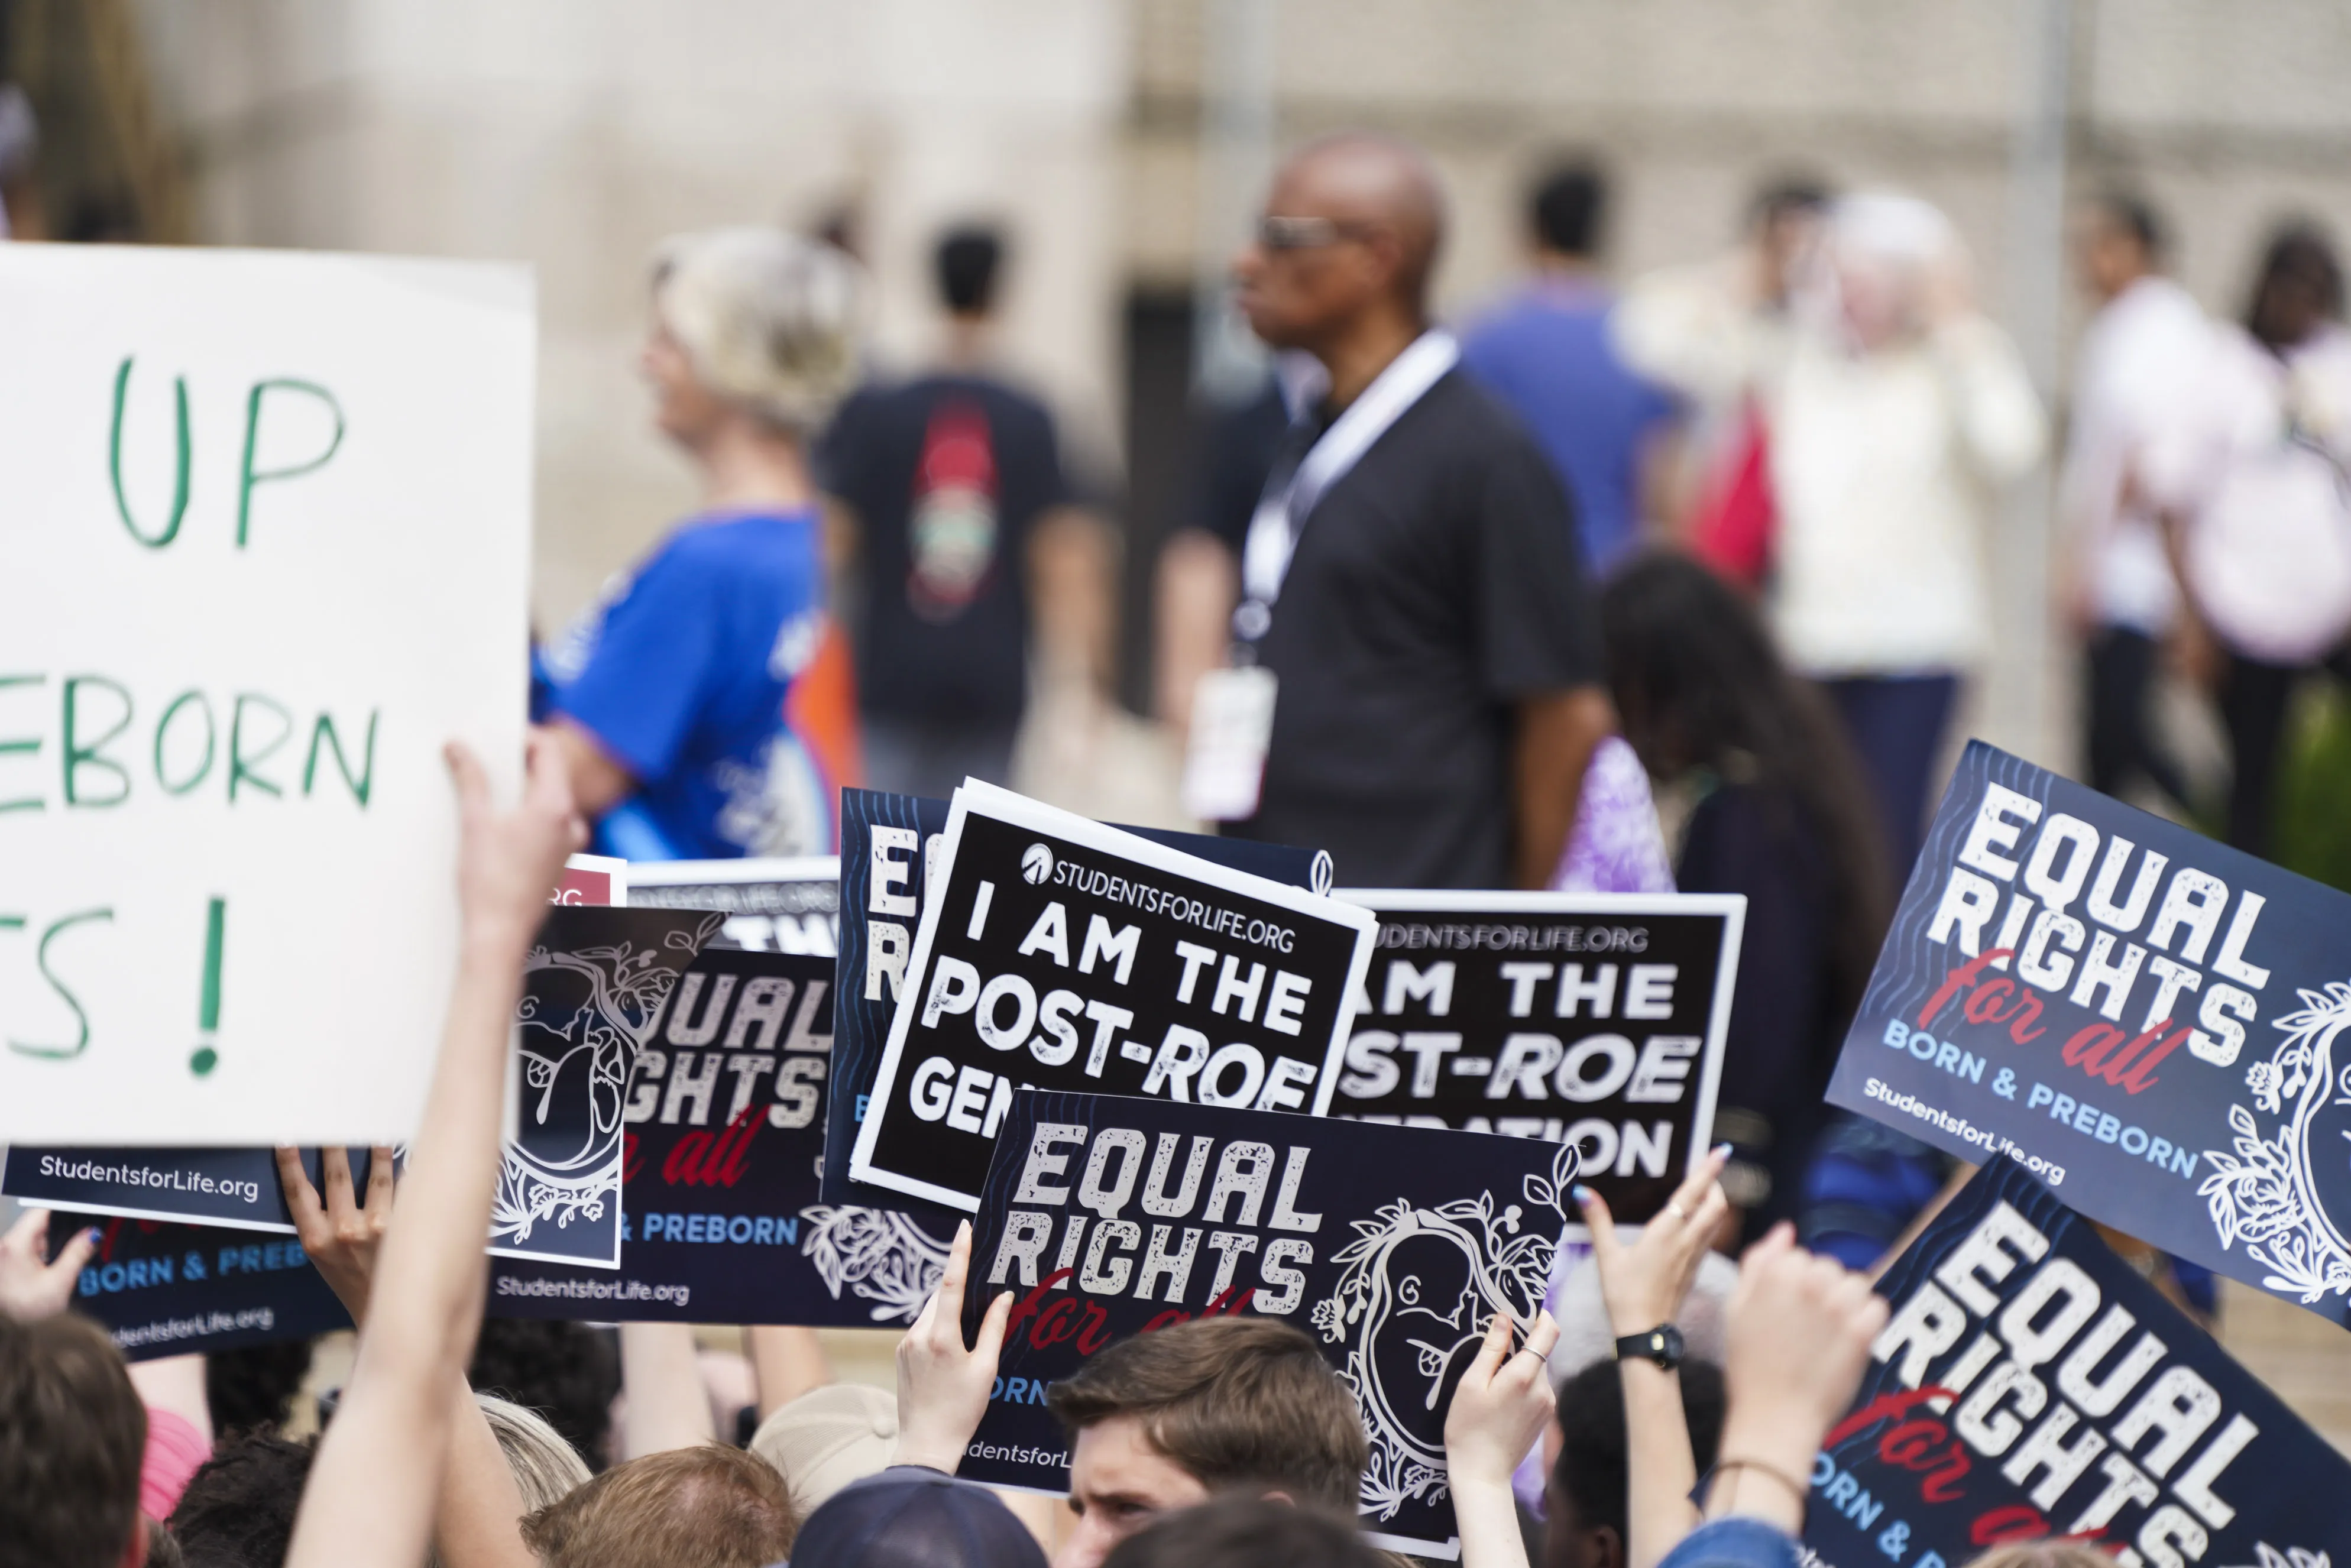 Participants in a pro-life rally hold signs in front of the Lincoln Memorial in Washington, D.C., on June 24, 2023, at a rally marking the first anniversary of the Supreme Court's Dobbs decision that overturned Roe v. Wade.?w=200&h=150